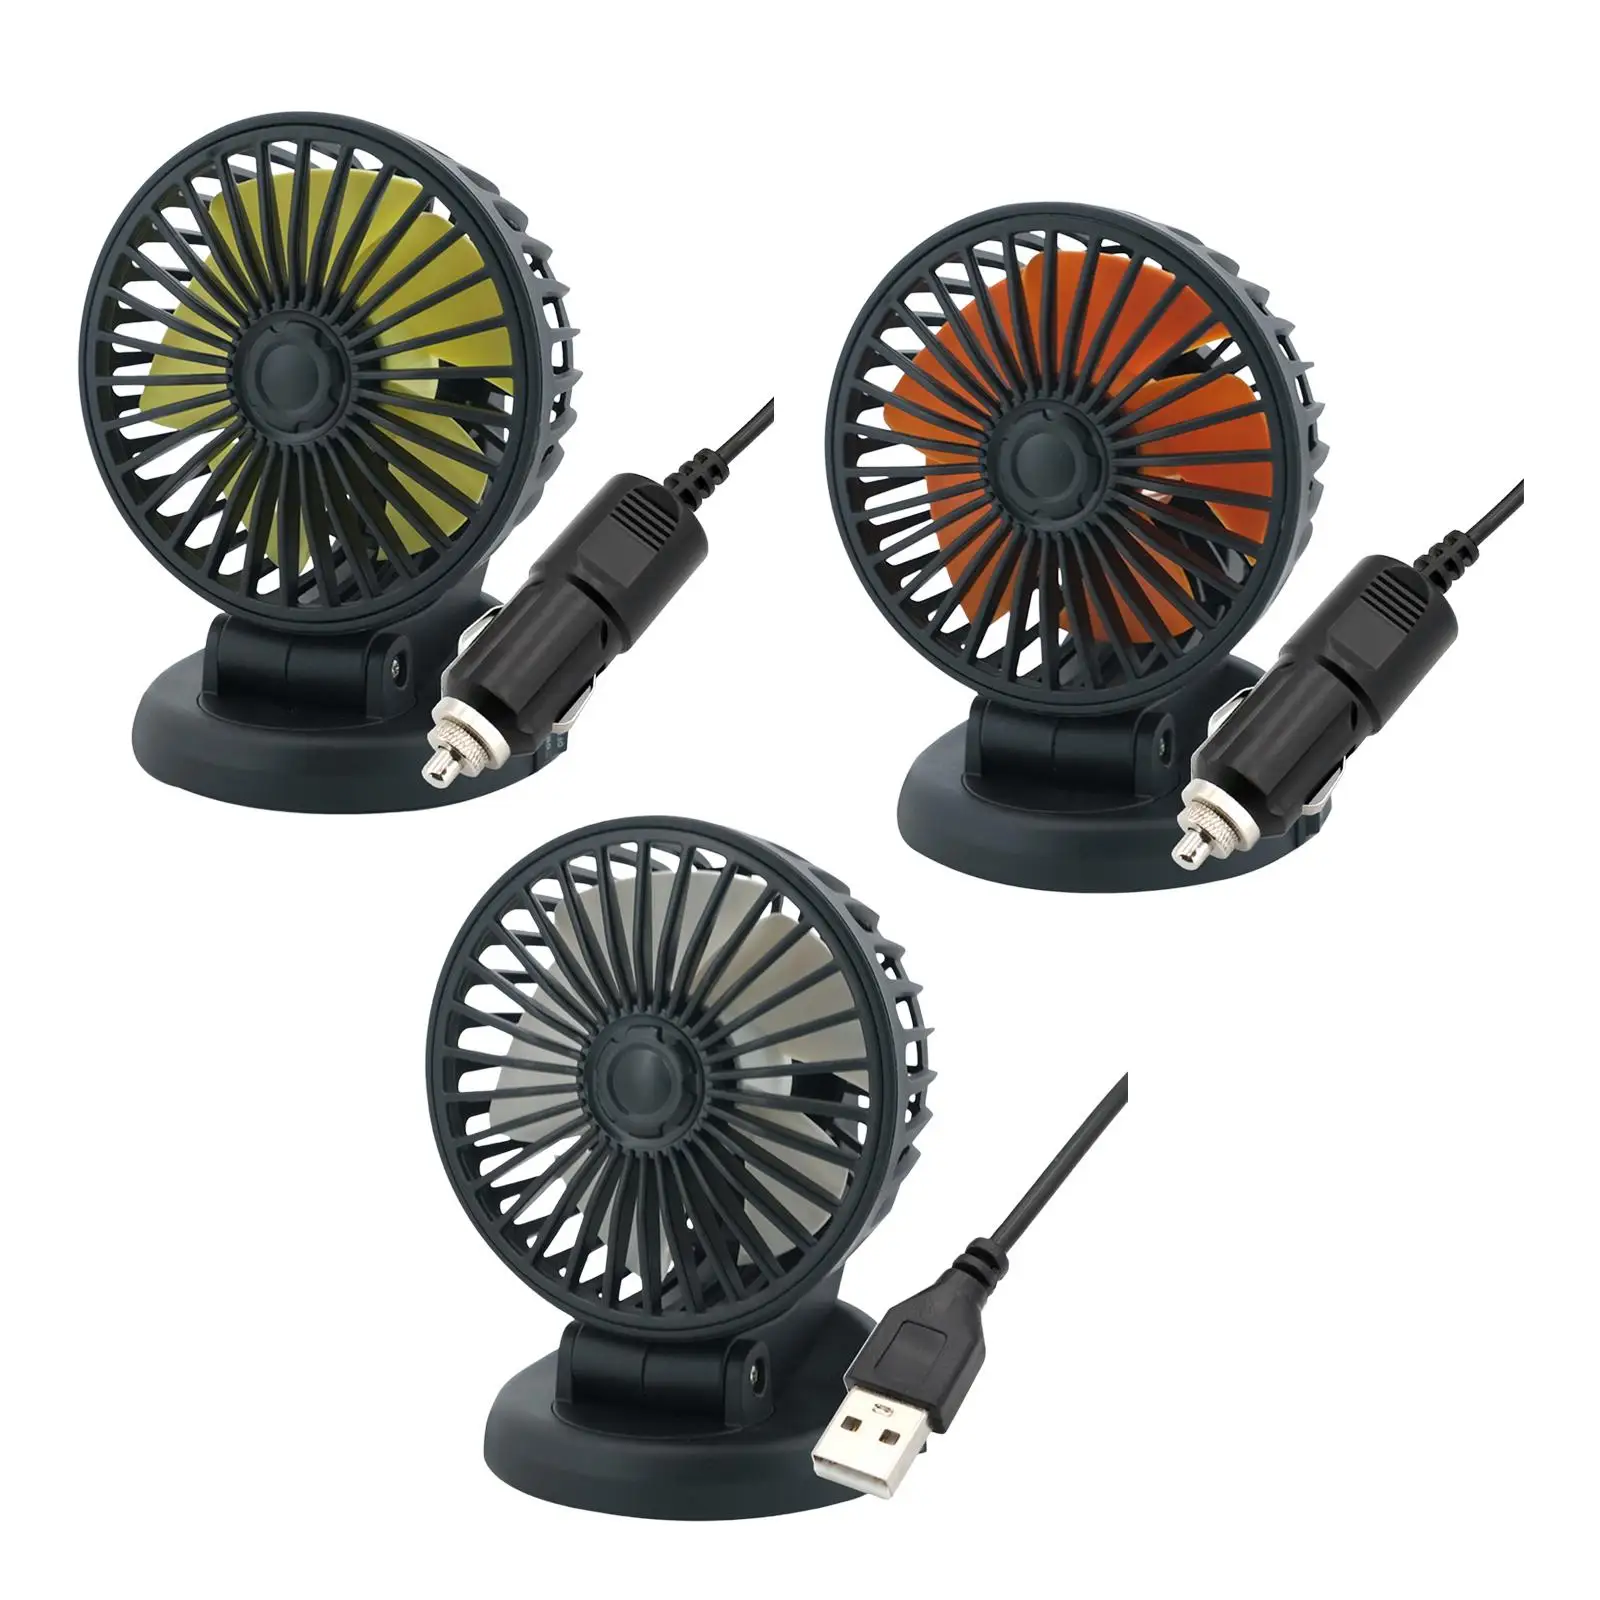 Rotatable Portable Fan for Car 2 Speeds Adjustable Air Circulation Fan Car Cooling Fan for Boat RV Vehicle SUV Truck